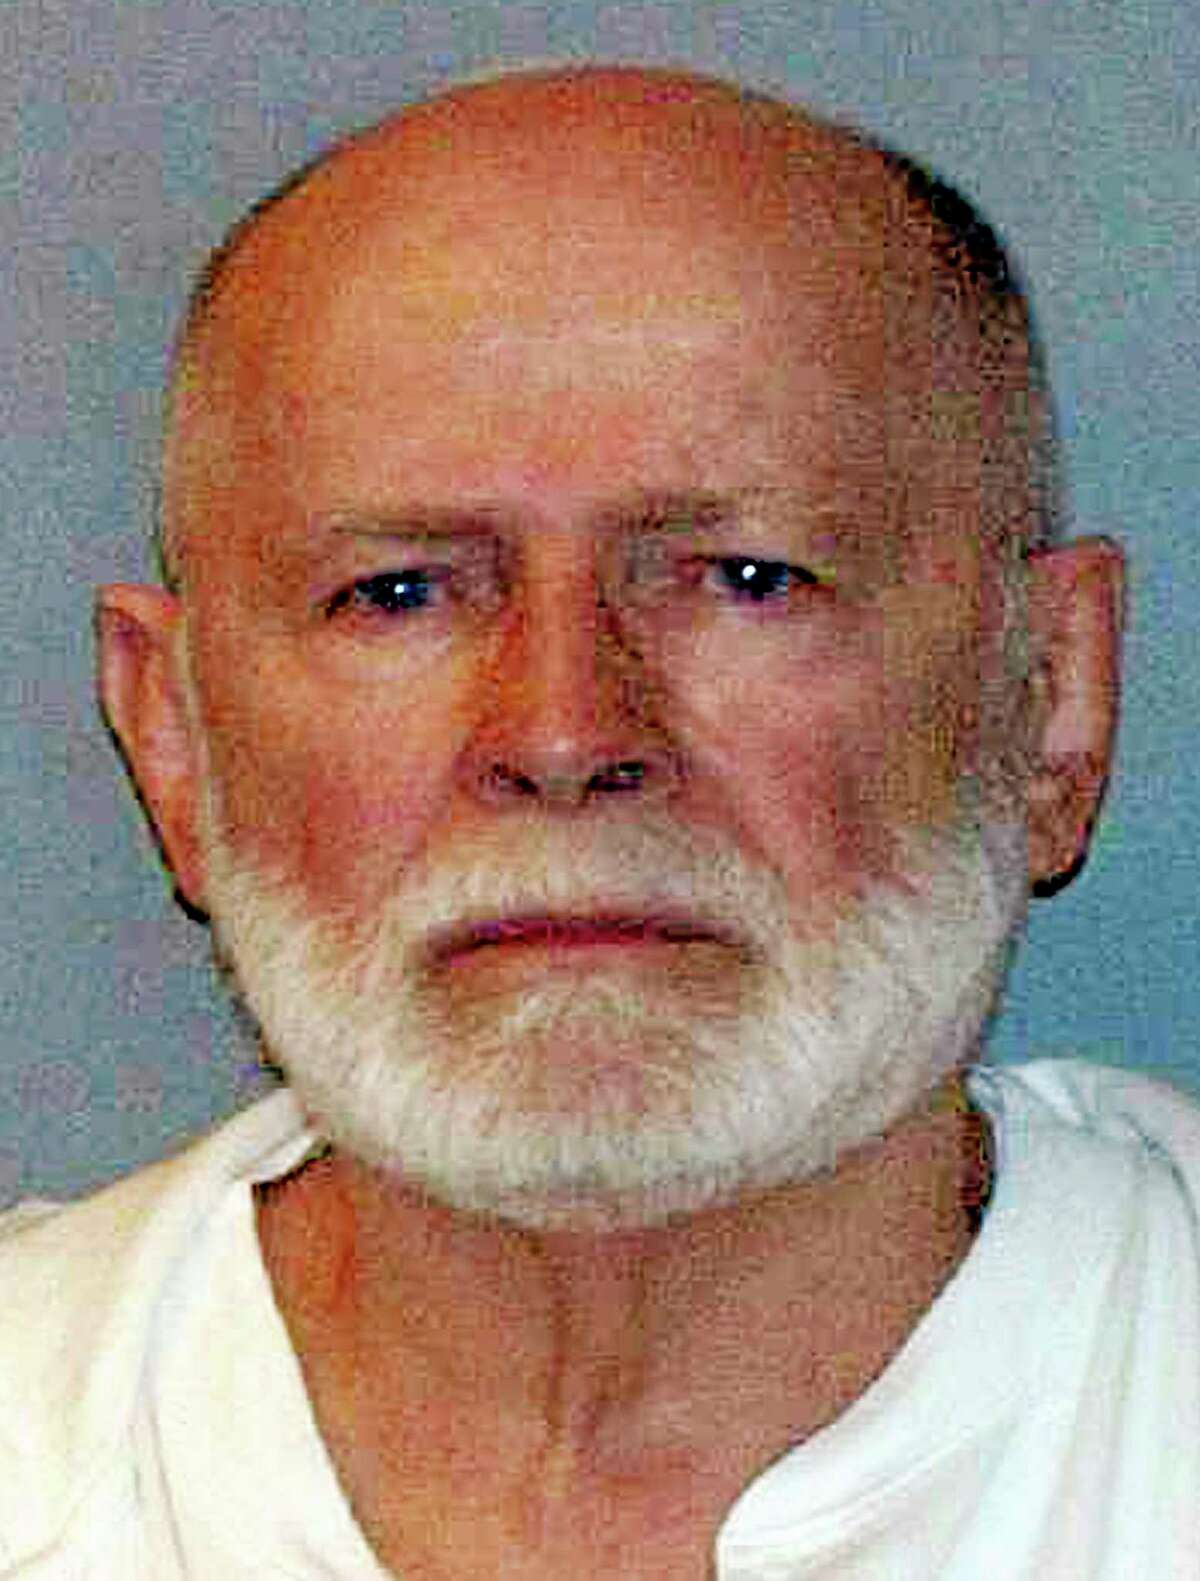 FILE - This file June 23, 2011 booking photo provided by the U.S. Marshals Service shows James "Whitey" Bulger, captured in Santa Monica, Calif., after 16 years on the run. Bulger could soon see some of his jewelry, clothes and other belongings on the auction block. The U.S. Marshals Service will auction off many of the items seized from Bulger's California apartment after his arrest two years ago, The Boston Globe reported Saturday, Nov. 30, 2013. (AP Photo/U.S. Marshals Service, File)